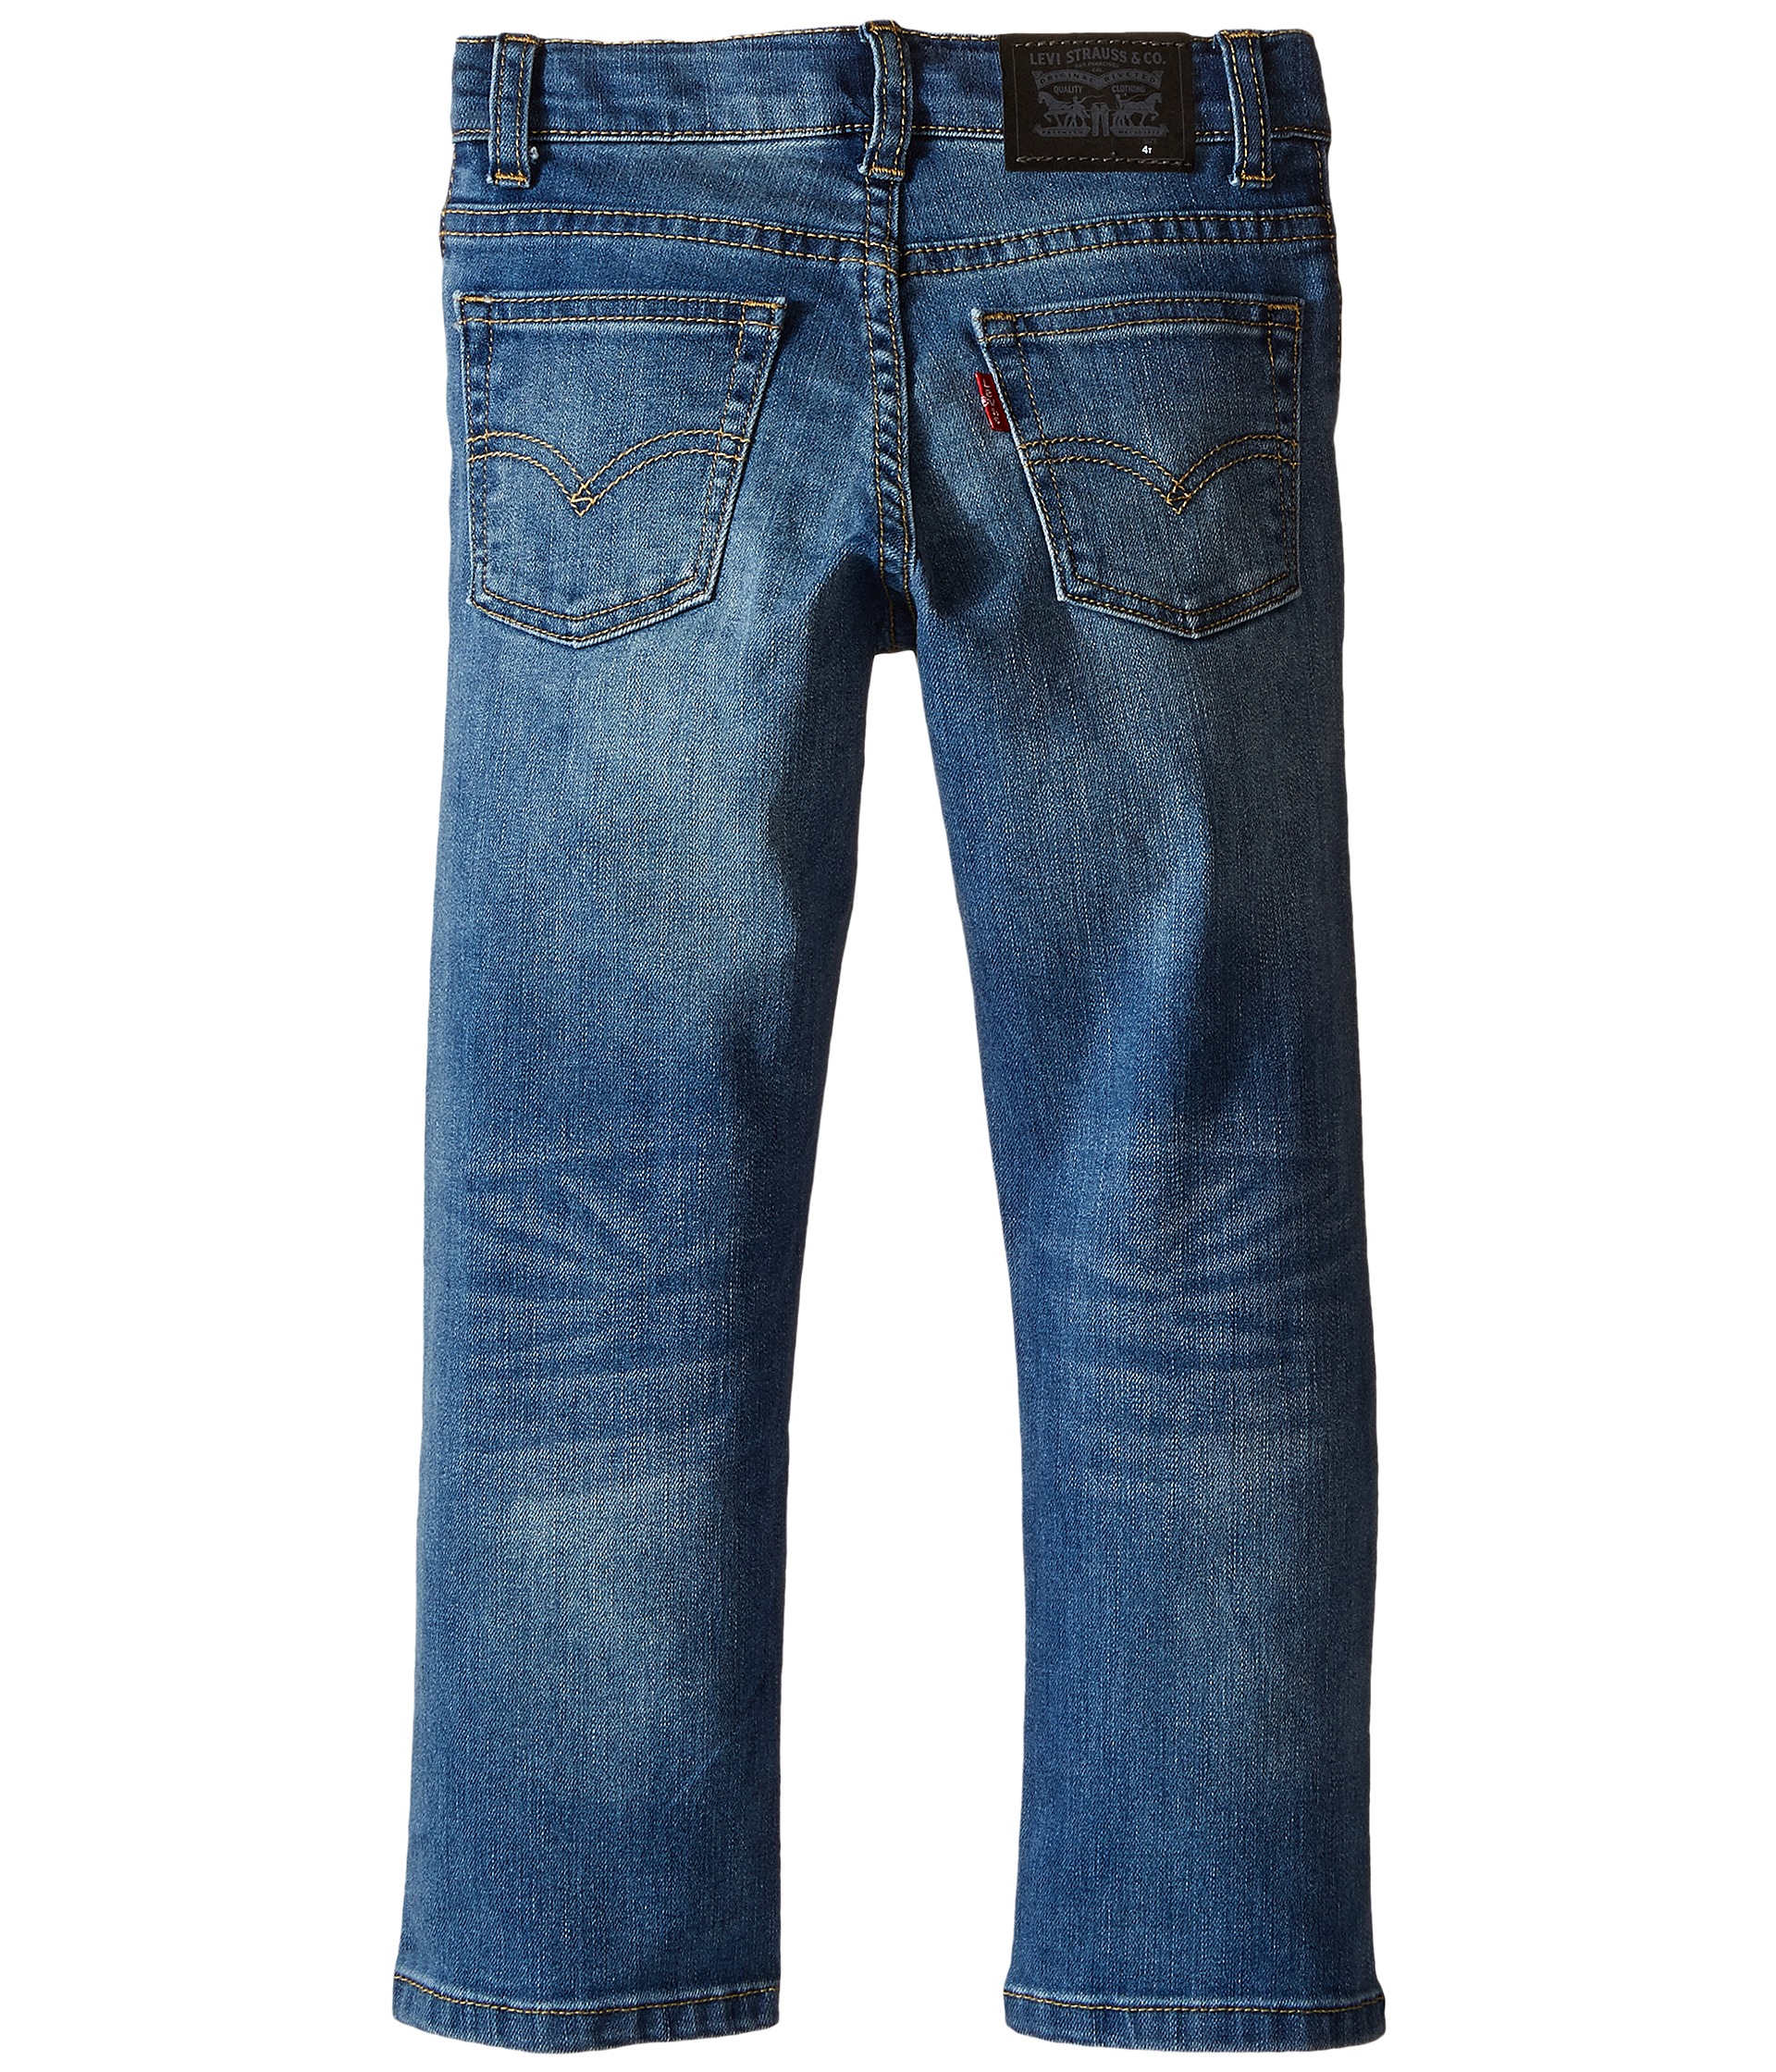 Levi's® Kids 511 Performance Jeans (Toddler) at Zappos.com